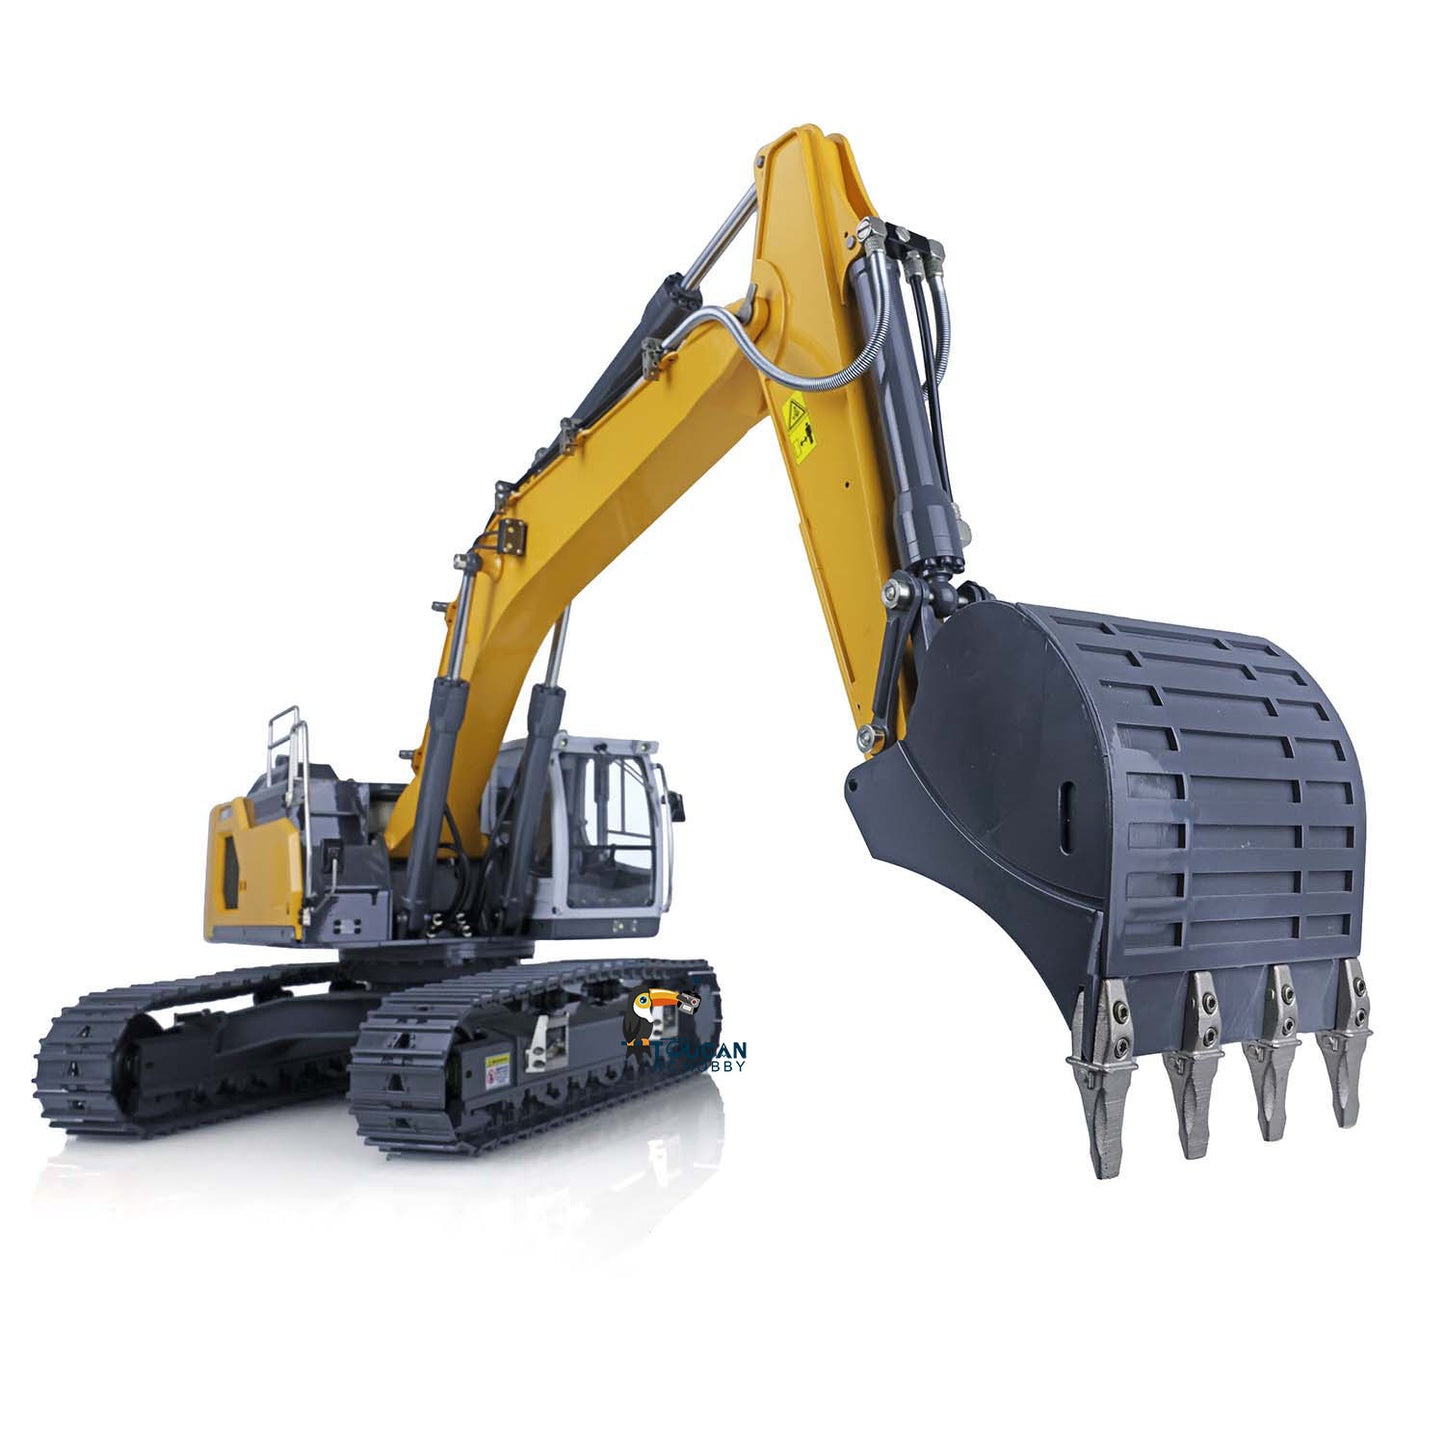 IN STOCK 945 Metal 1/14 Hydraulic RC Tracked Excavator Remote Control Painted Assembled Truck W/ I6s ESC Motor Servo Coupler